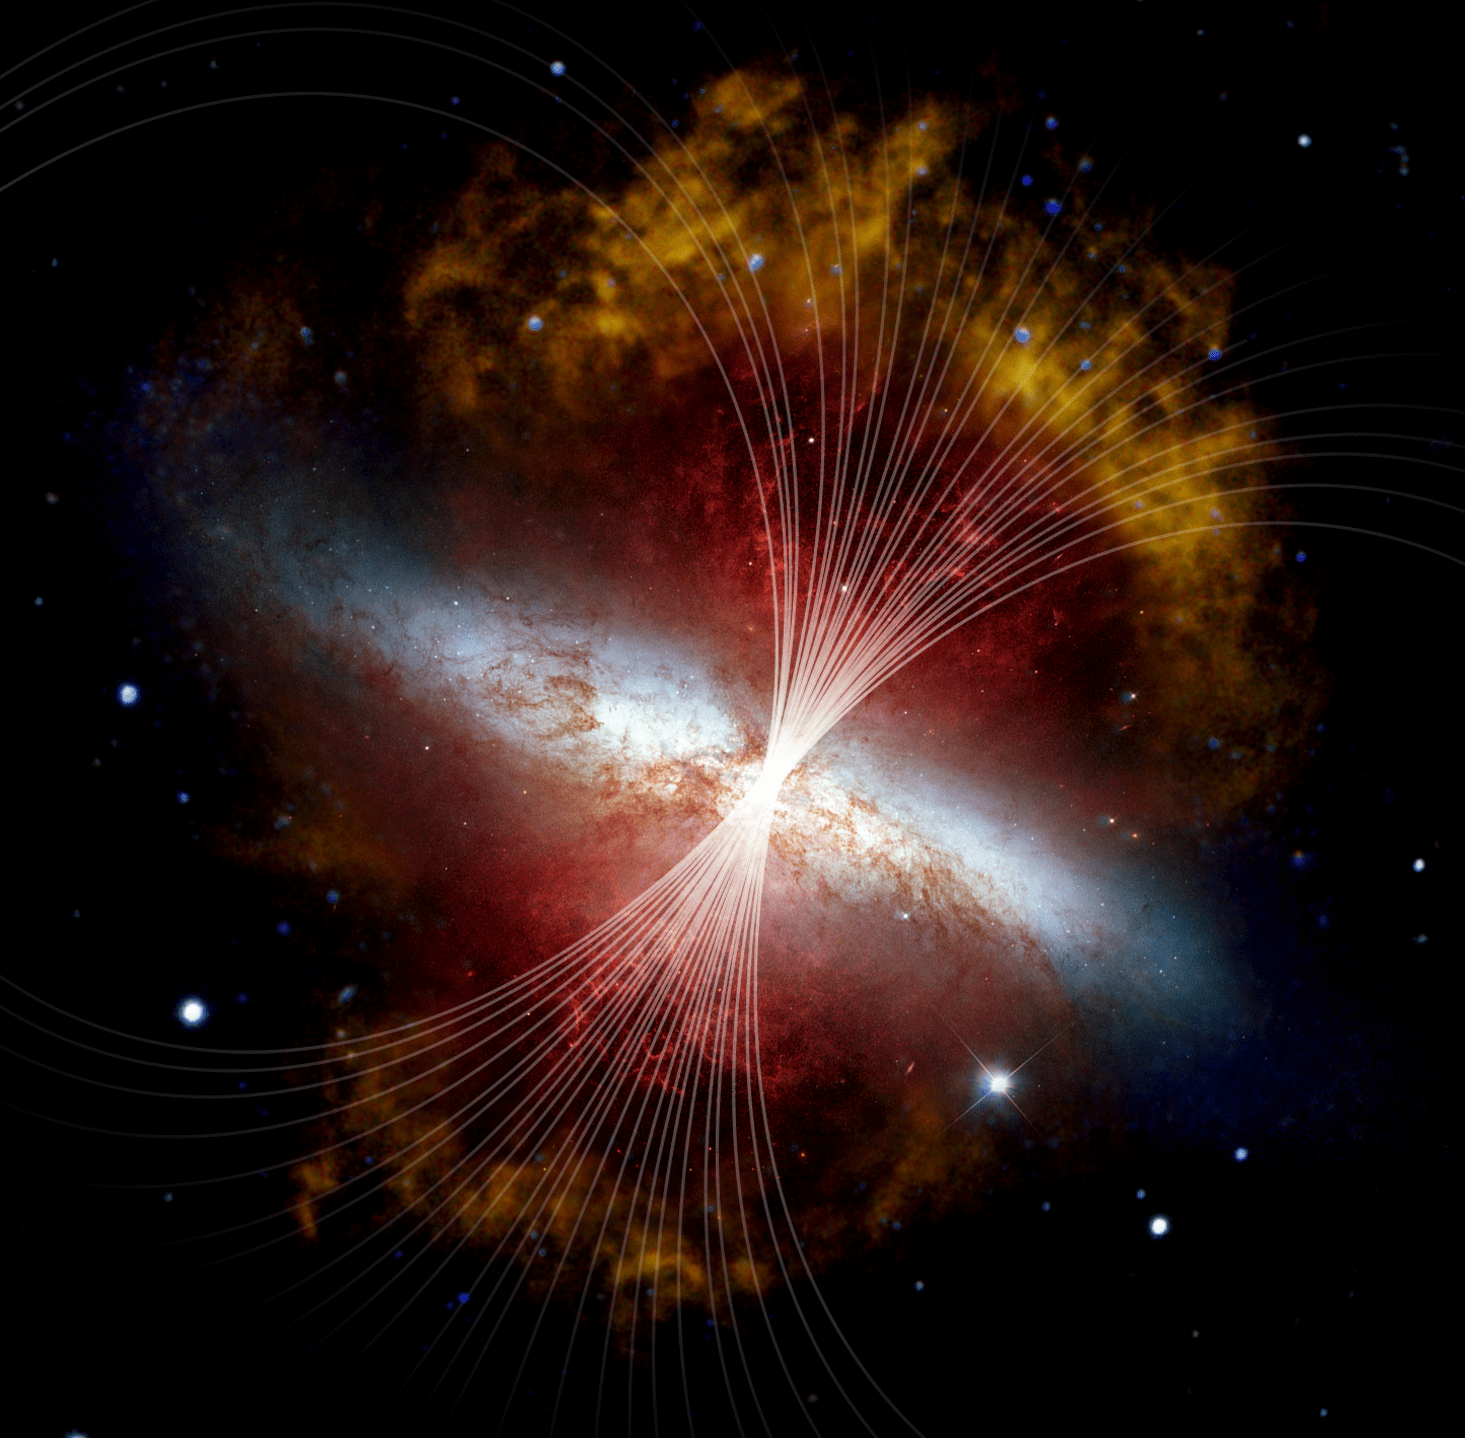 Depiction of magnetic fields (shown as white lines) in Messier 82, or the Cigar galaxy. (Image: NASA, SOFIA, L. Proudfit; NASA, ESA, Hubble Heritage Team; NASA, JPL-Caltech, C. Engelbracht)